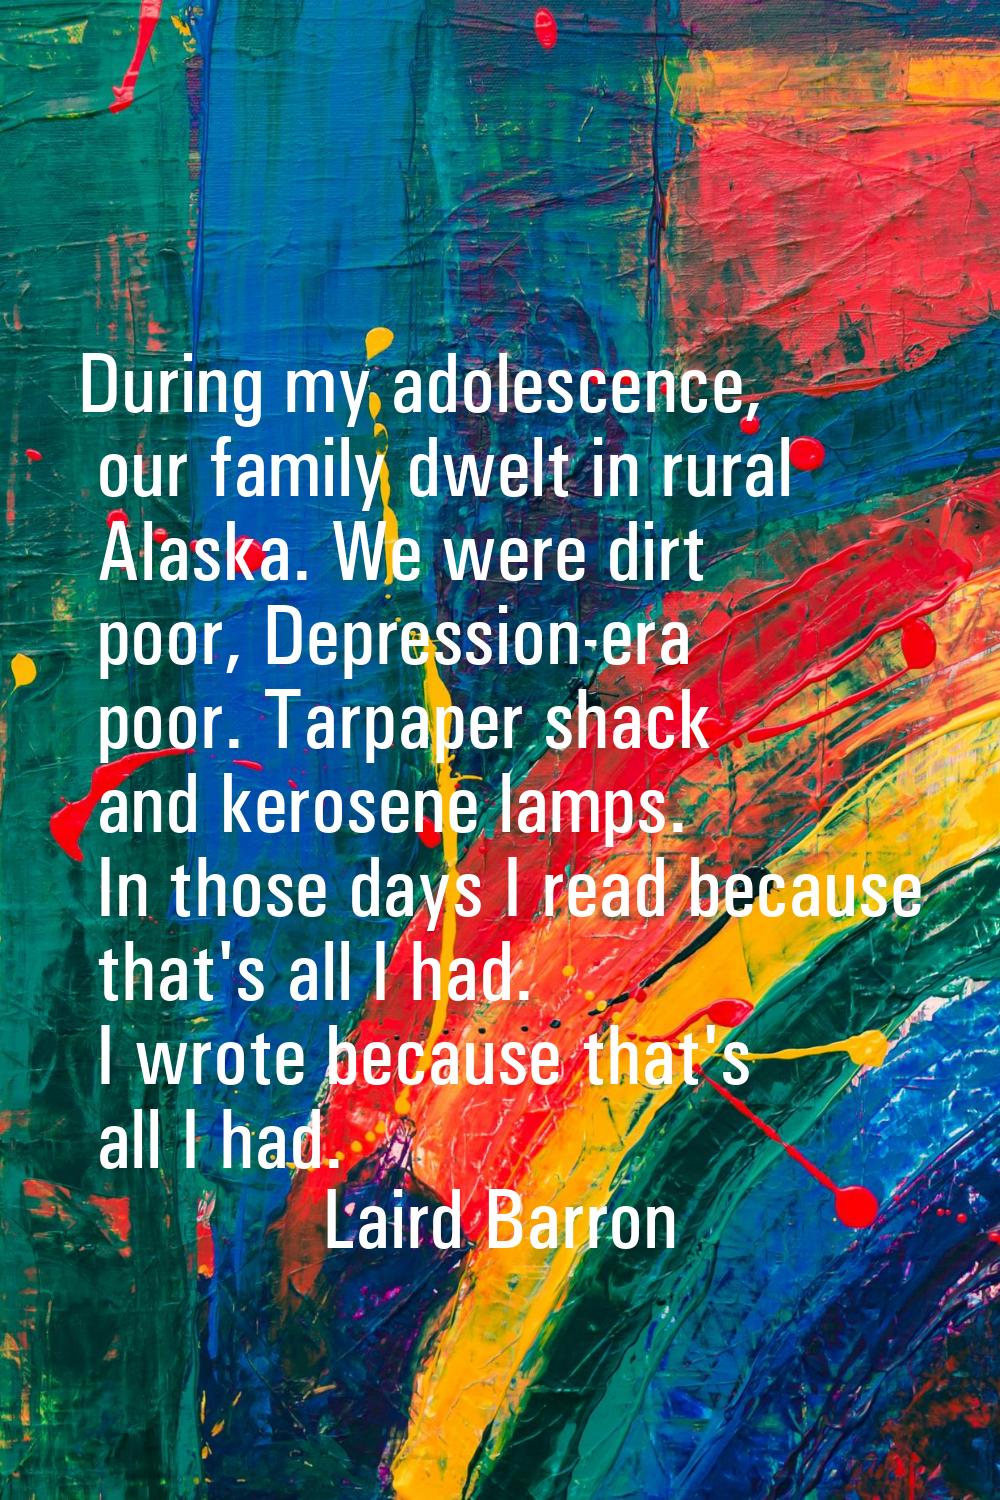 During my adolescence, our family dwelt in rural Alaska. We were dirt poor, Depression-era poor. Ta